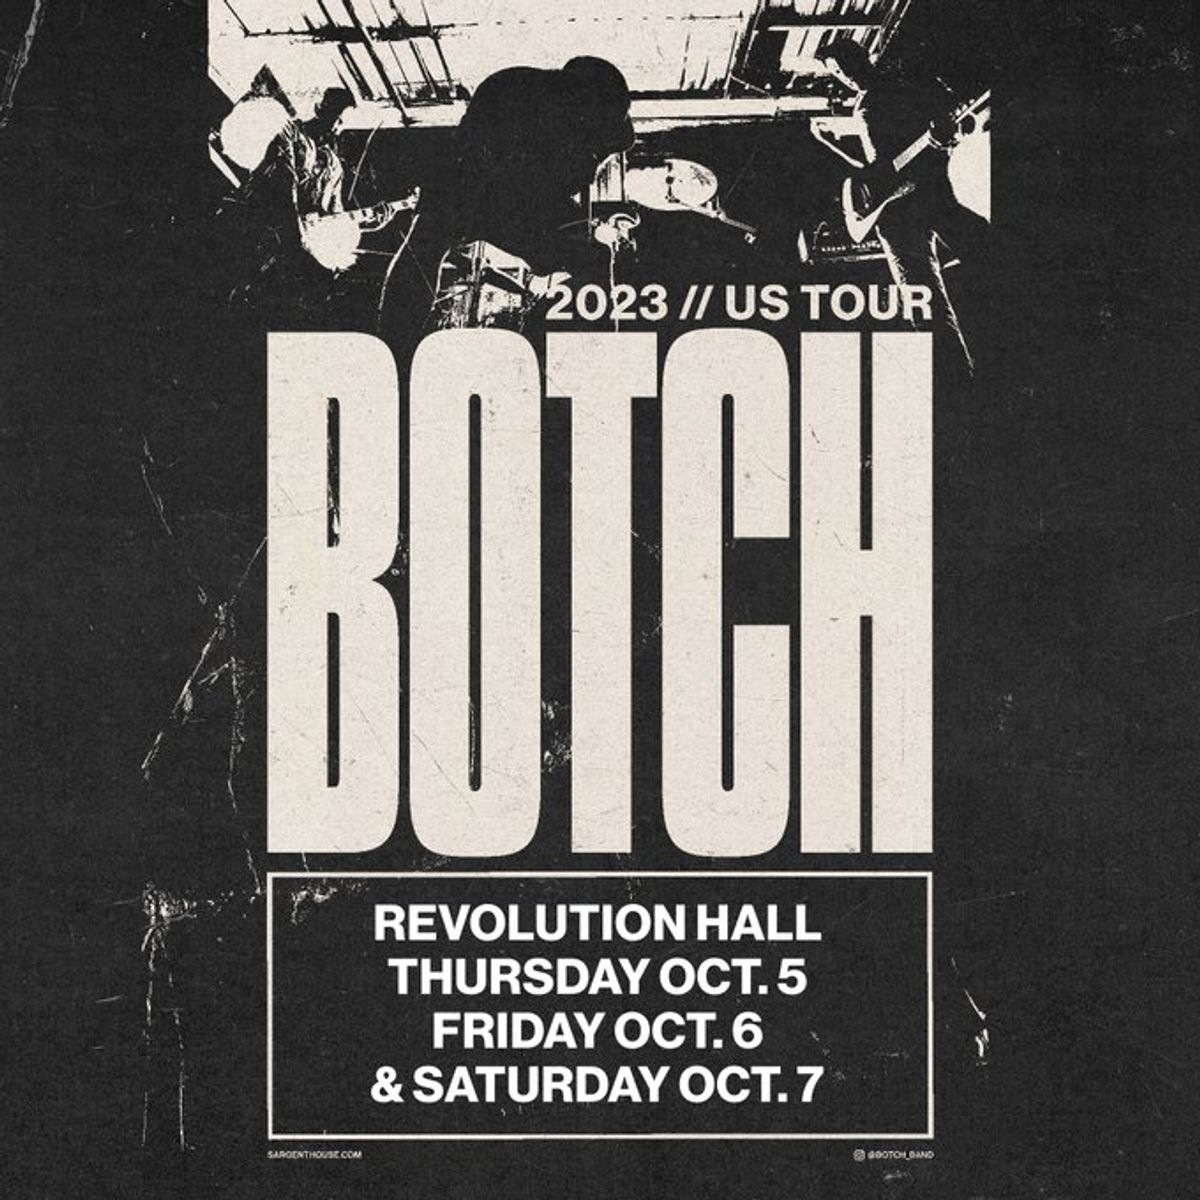 Botch at Revolution Hall in Portland, OR Multiple dates between Oct 5